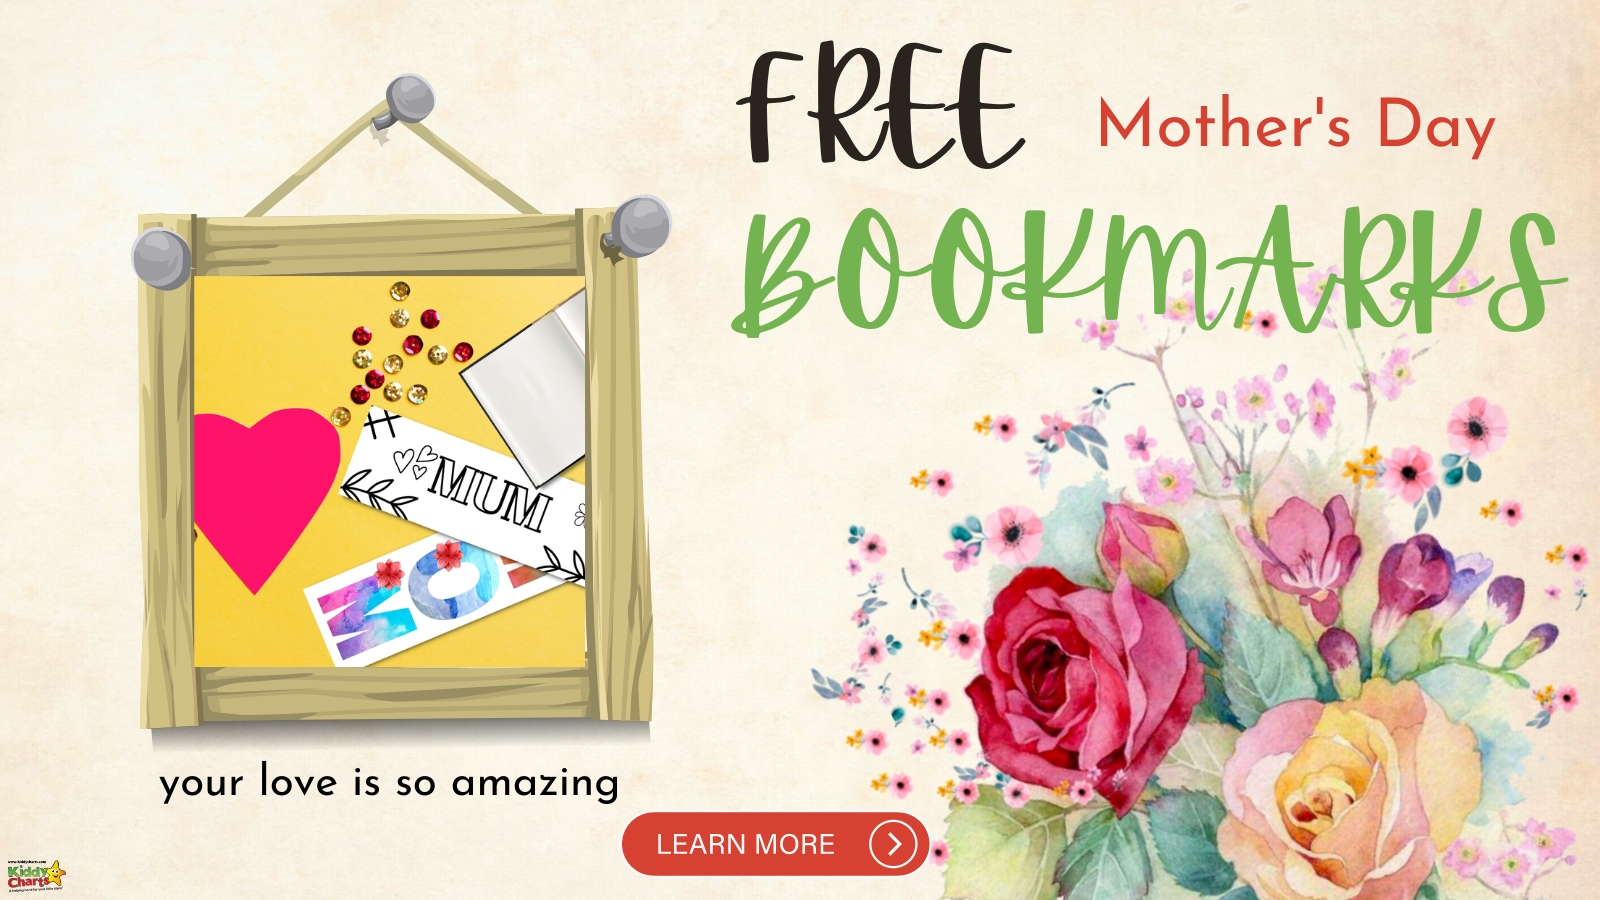 Free Mothers day bookmarks as a simple Mothers day gift